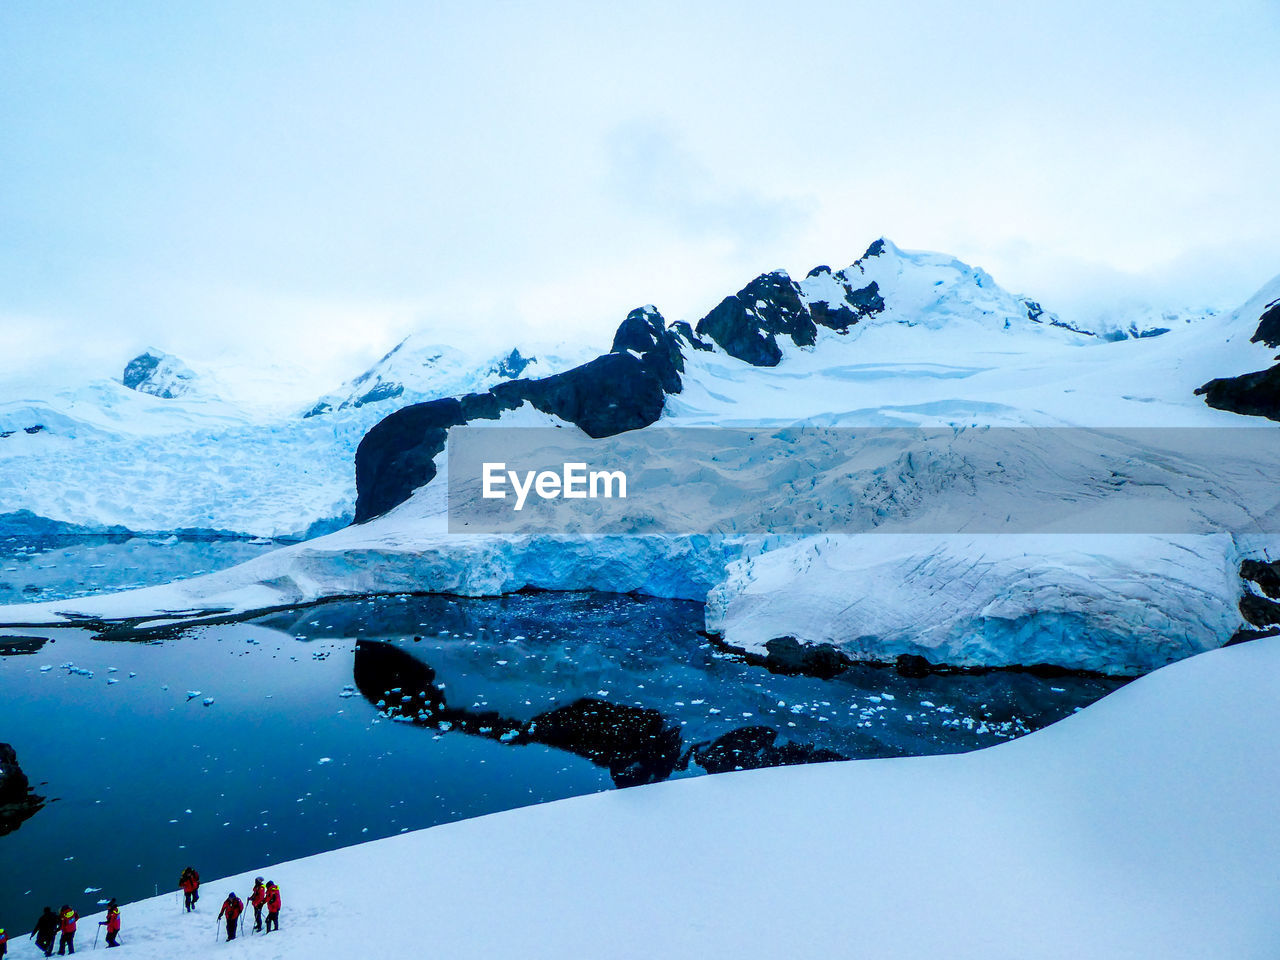 Group of hikers in snowy landscape with mountains and sea in antarctica 